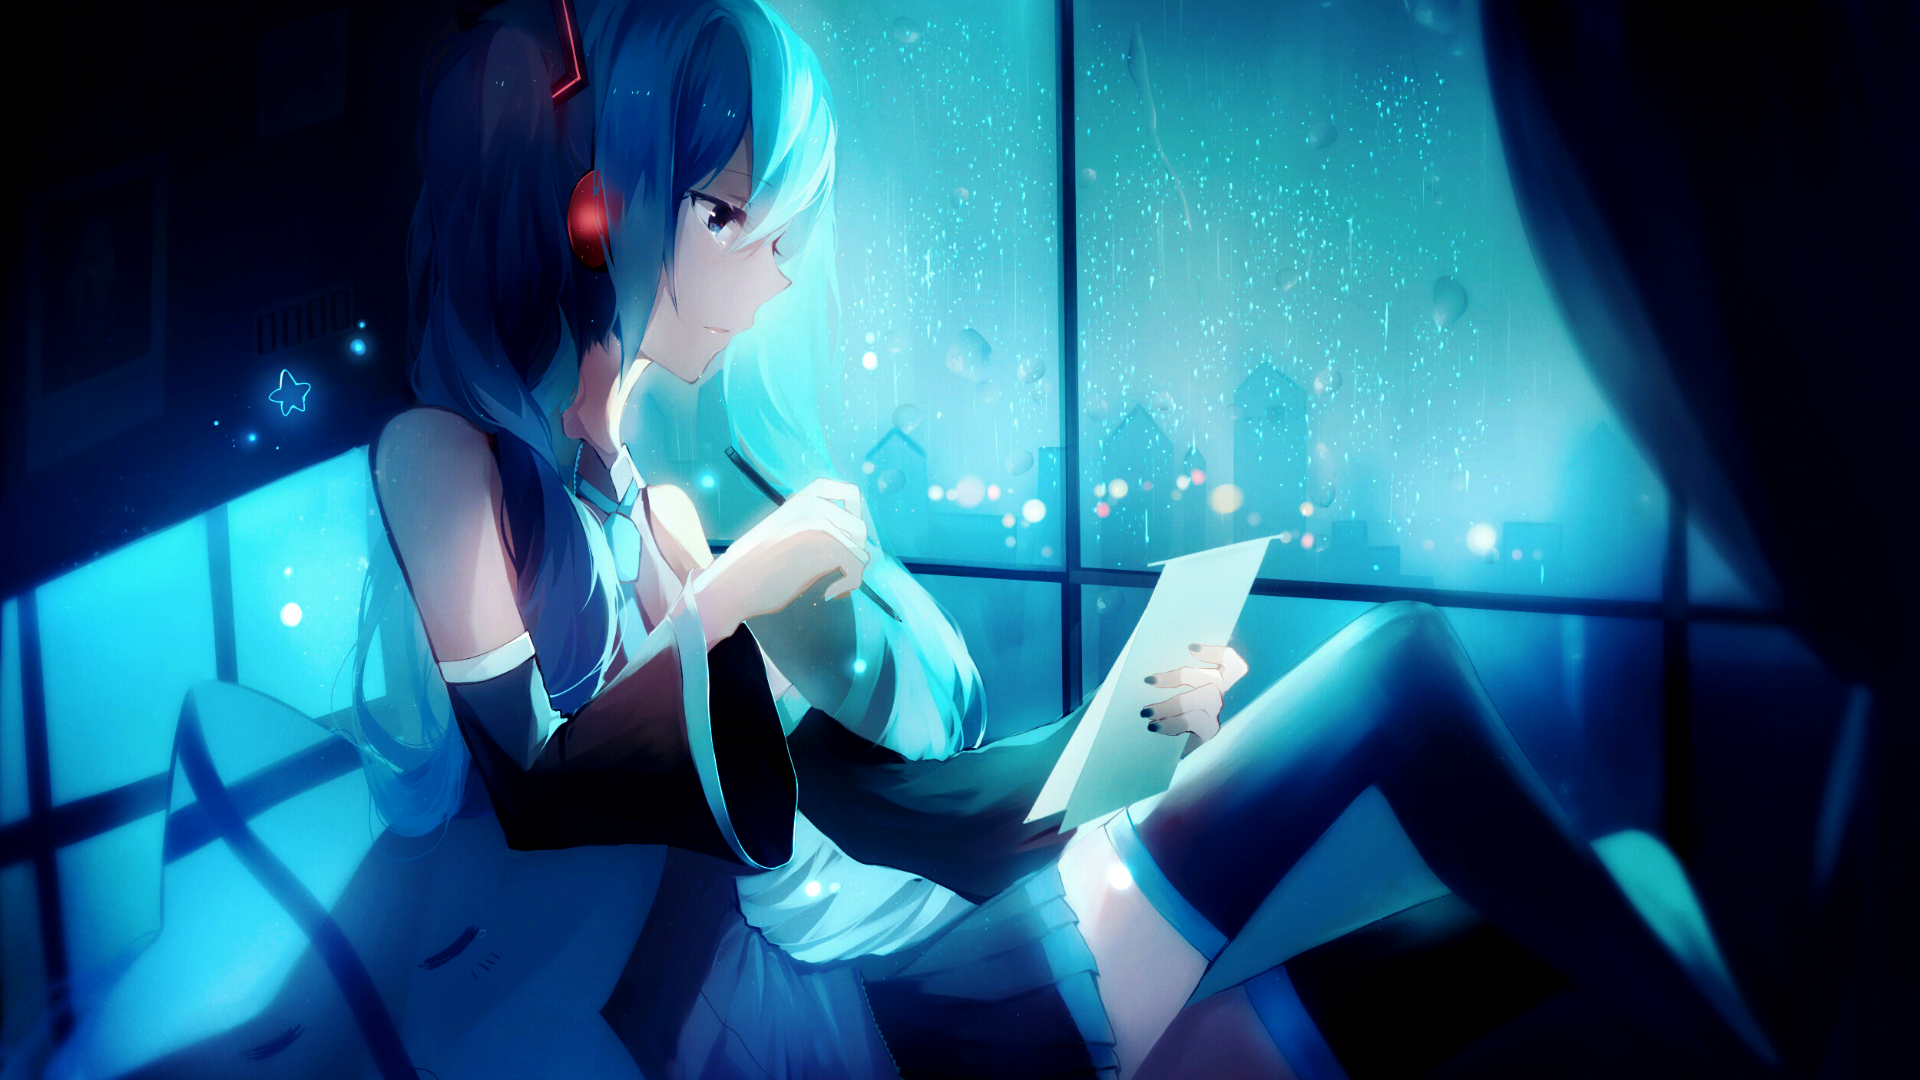 Wallpapers anime blue Vocaloid on the desktop